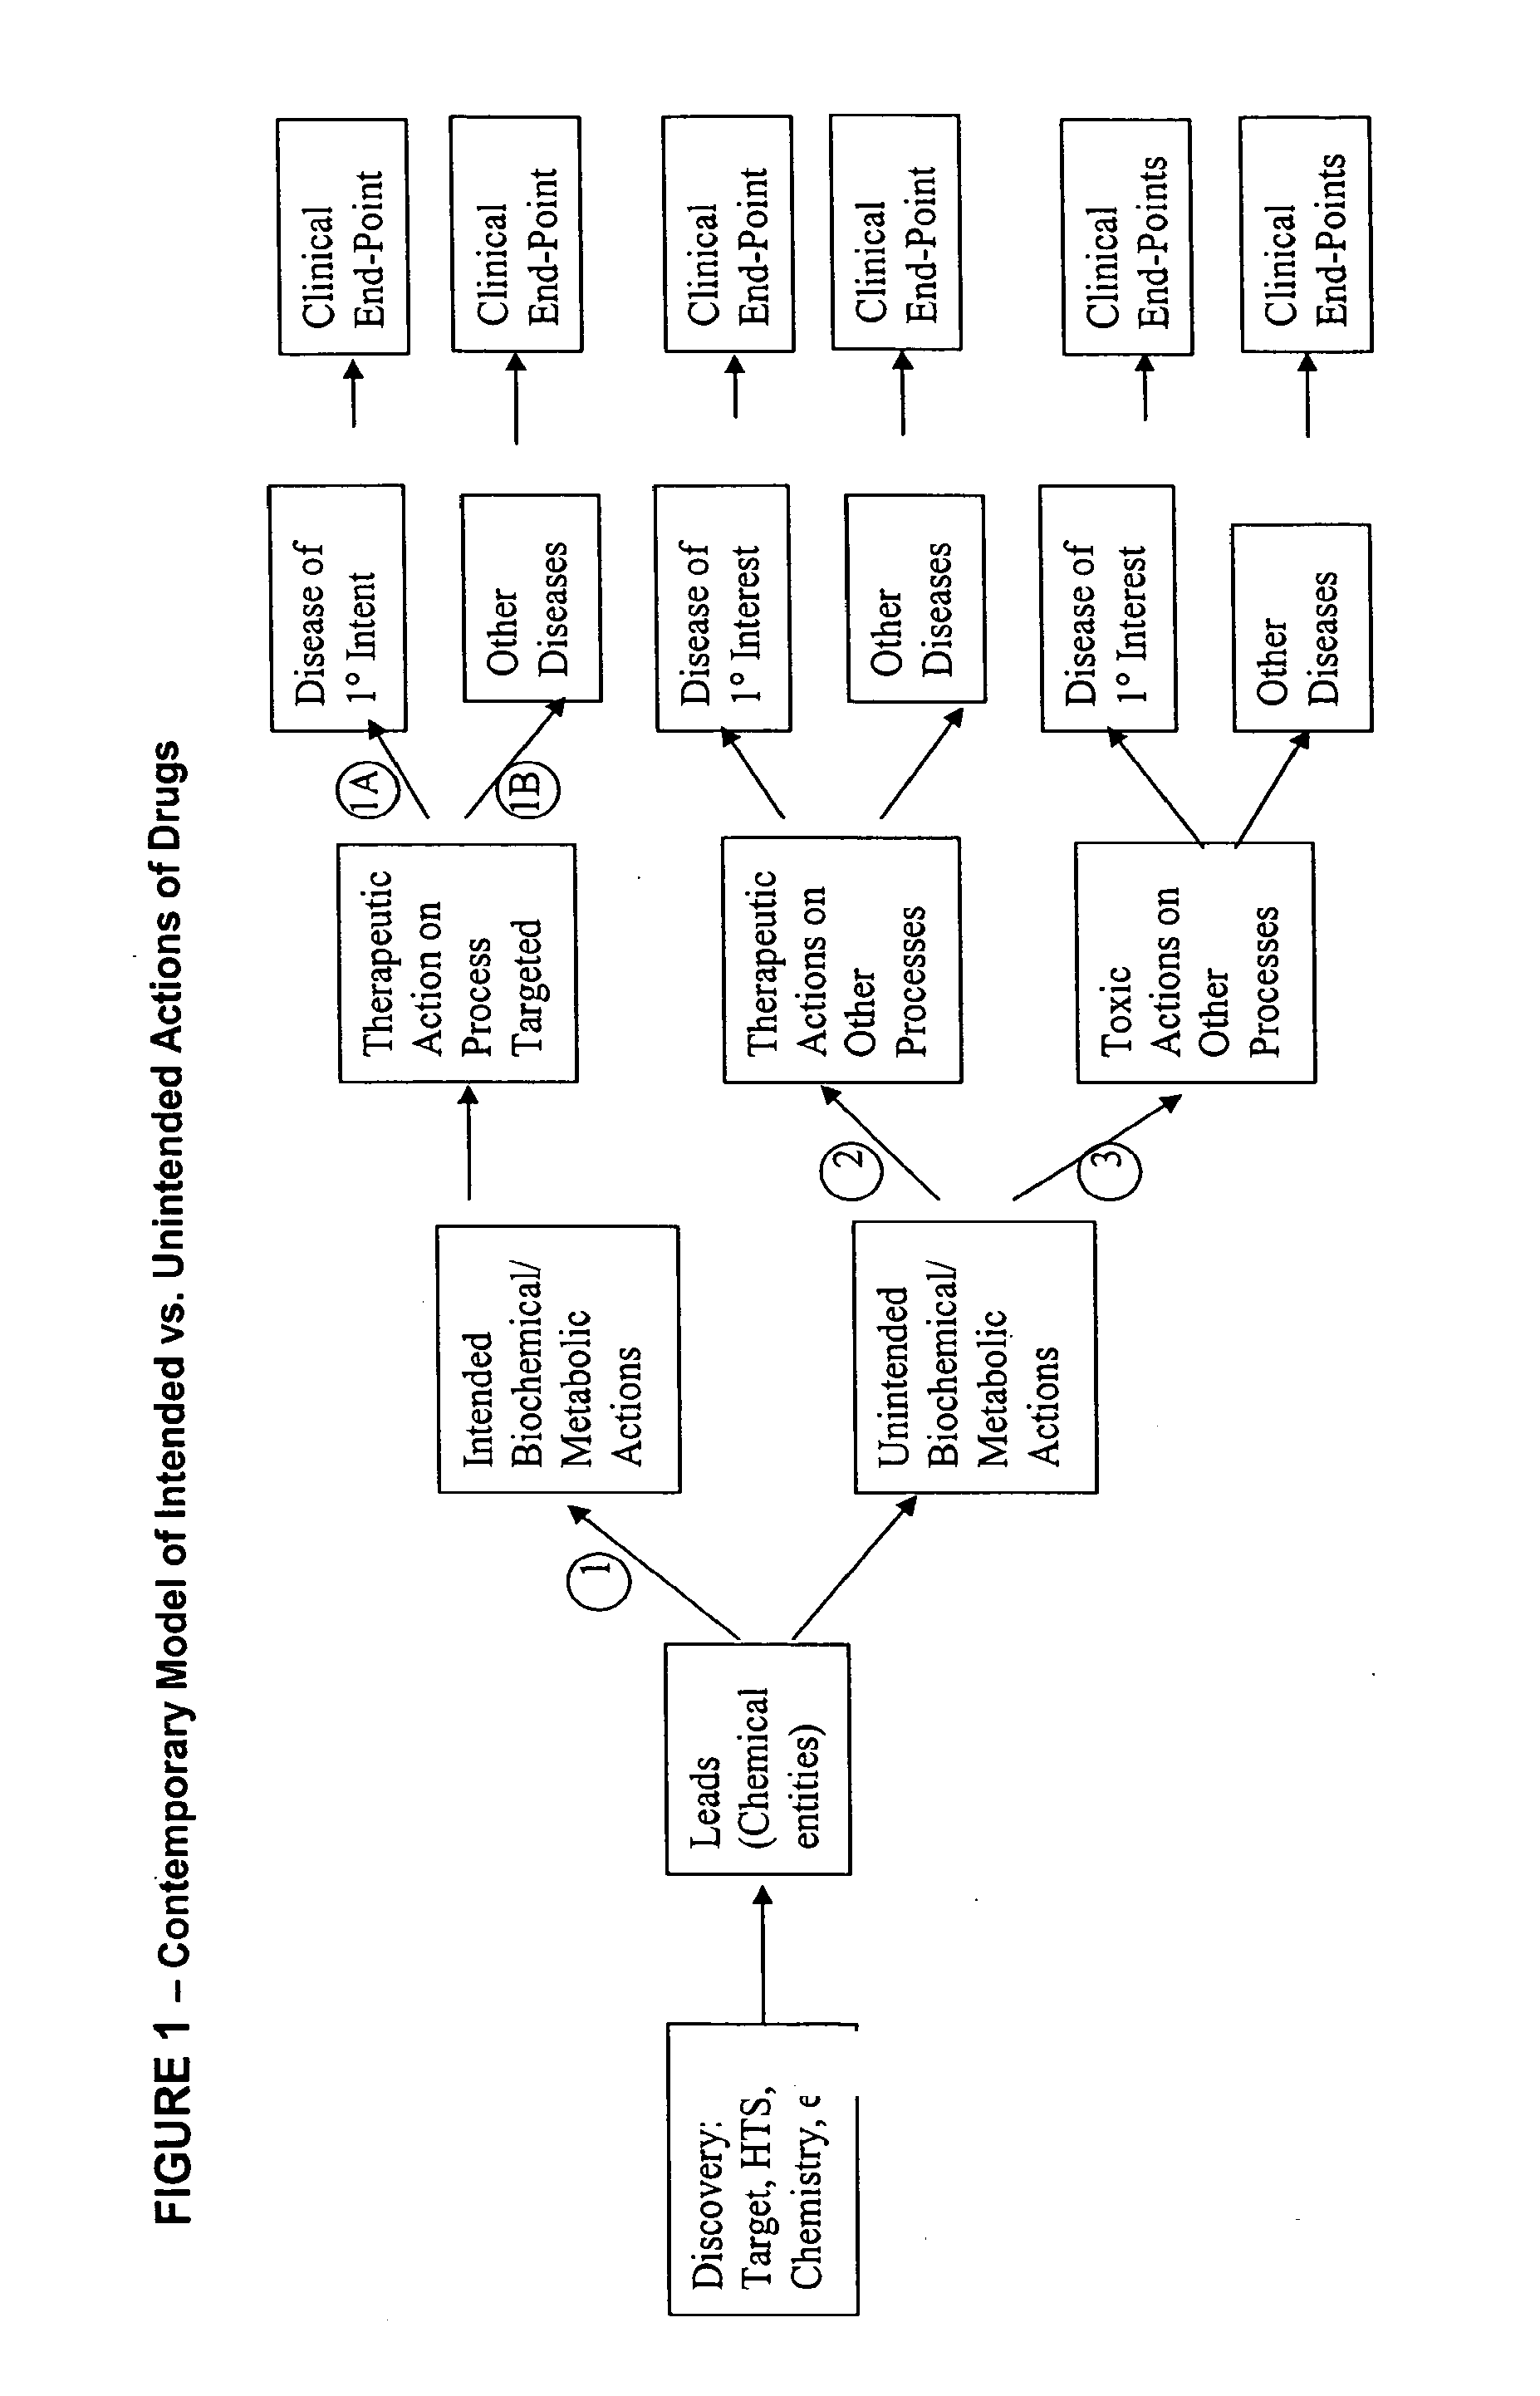 Method for high-throughput screening of compounds and combinations of compounds for discovery and quantification of actions, particularly unanticipated therapeutic or toxic actions, in biological systems